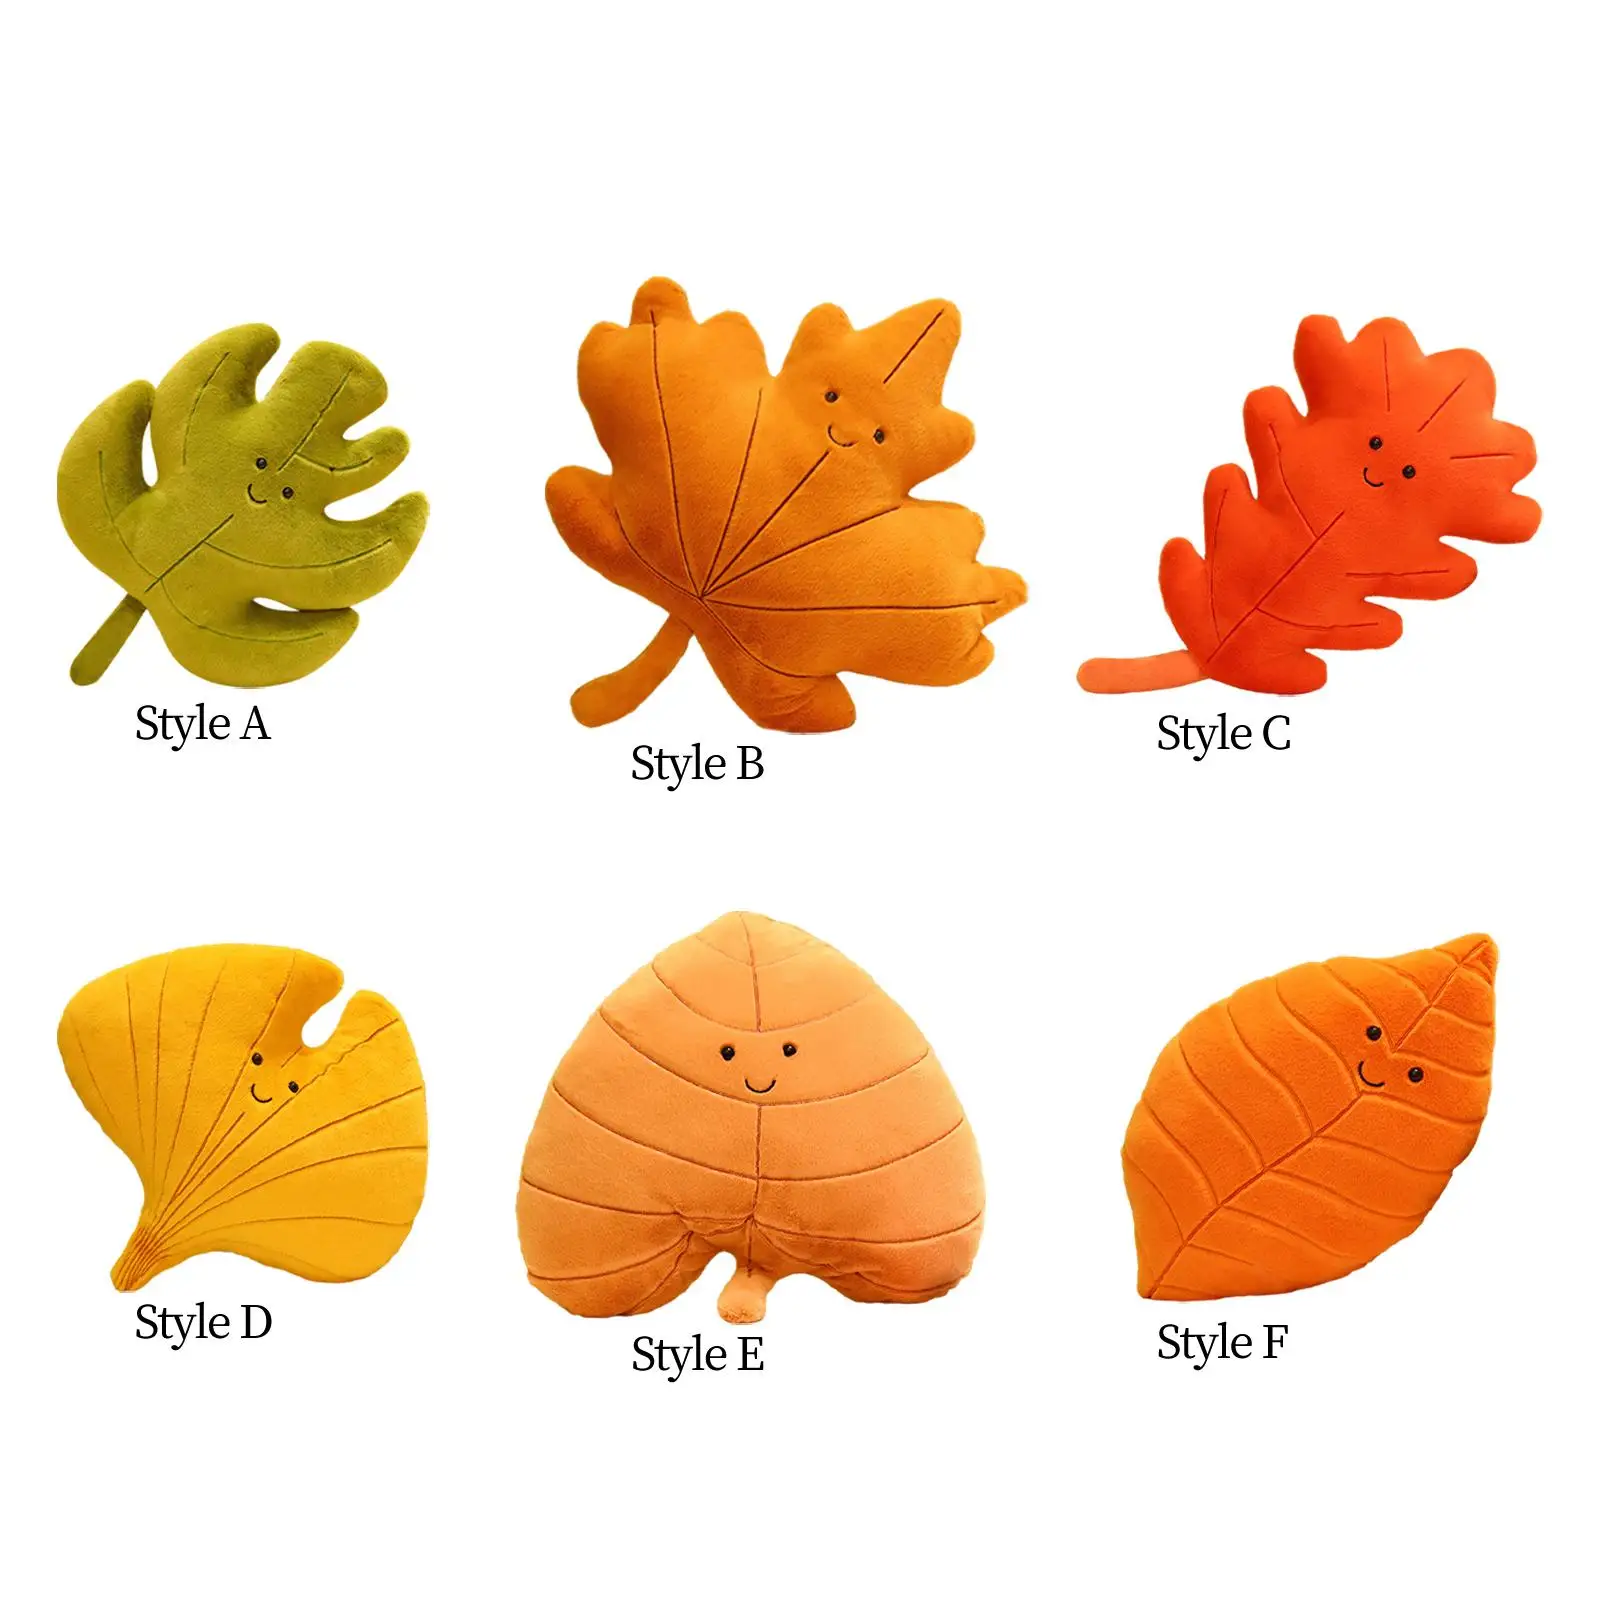 3D Leaf Plush Pillow Creative Soft Cute Decorative Throw Pillow Plush Toy Backrest Pillow for Couch Bed Bedroom Sofa Home Decor